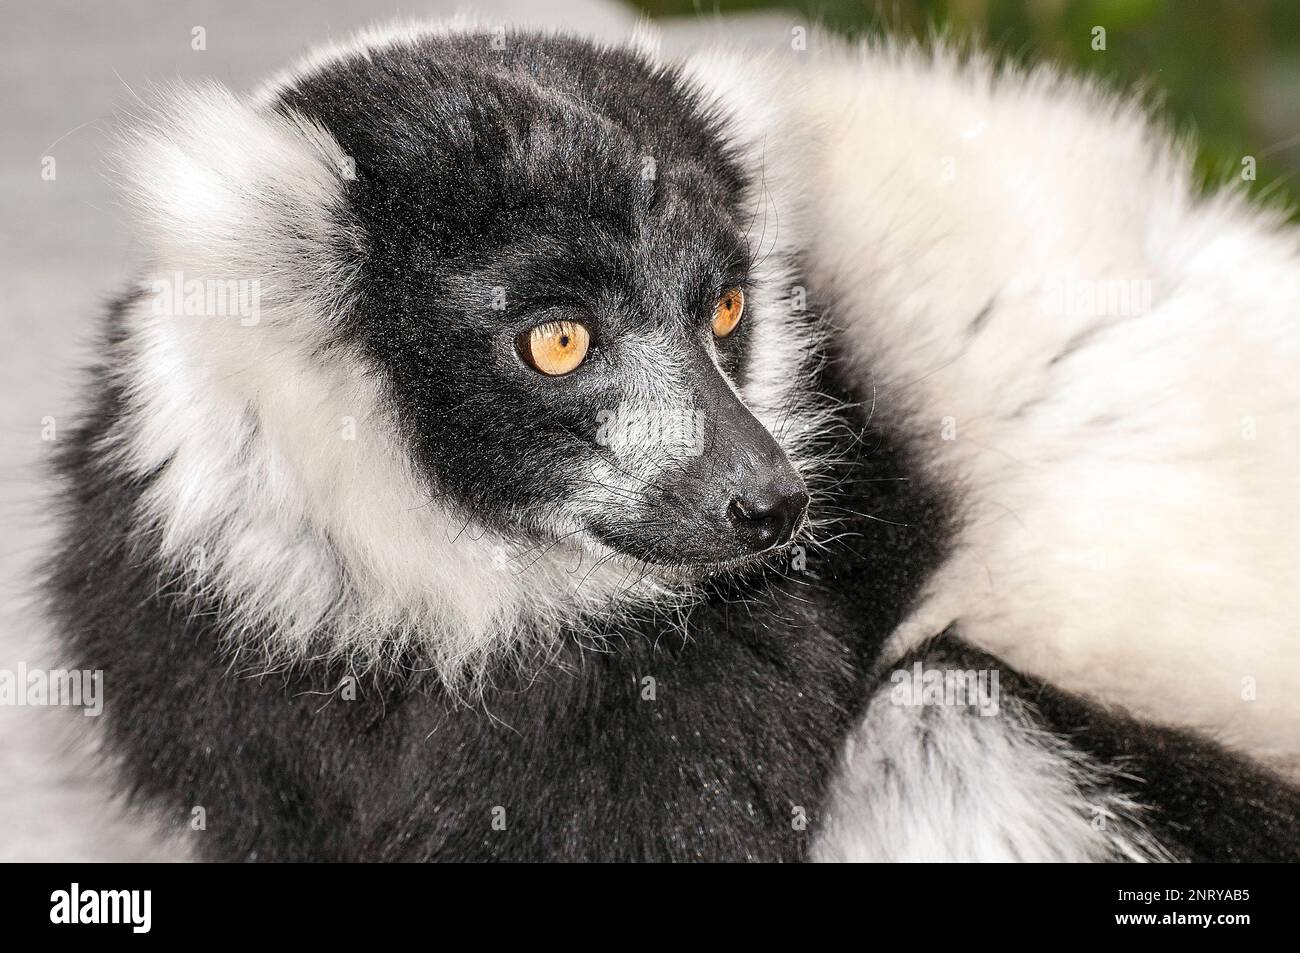 Black and white ruffed lemur a Critically Endangered species. Stock Photo